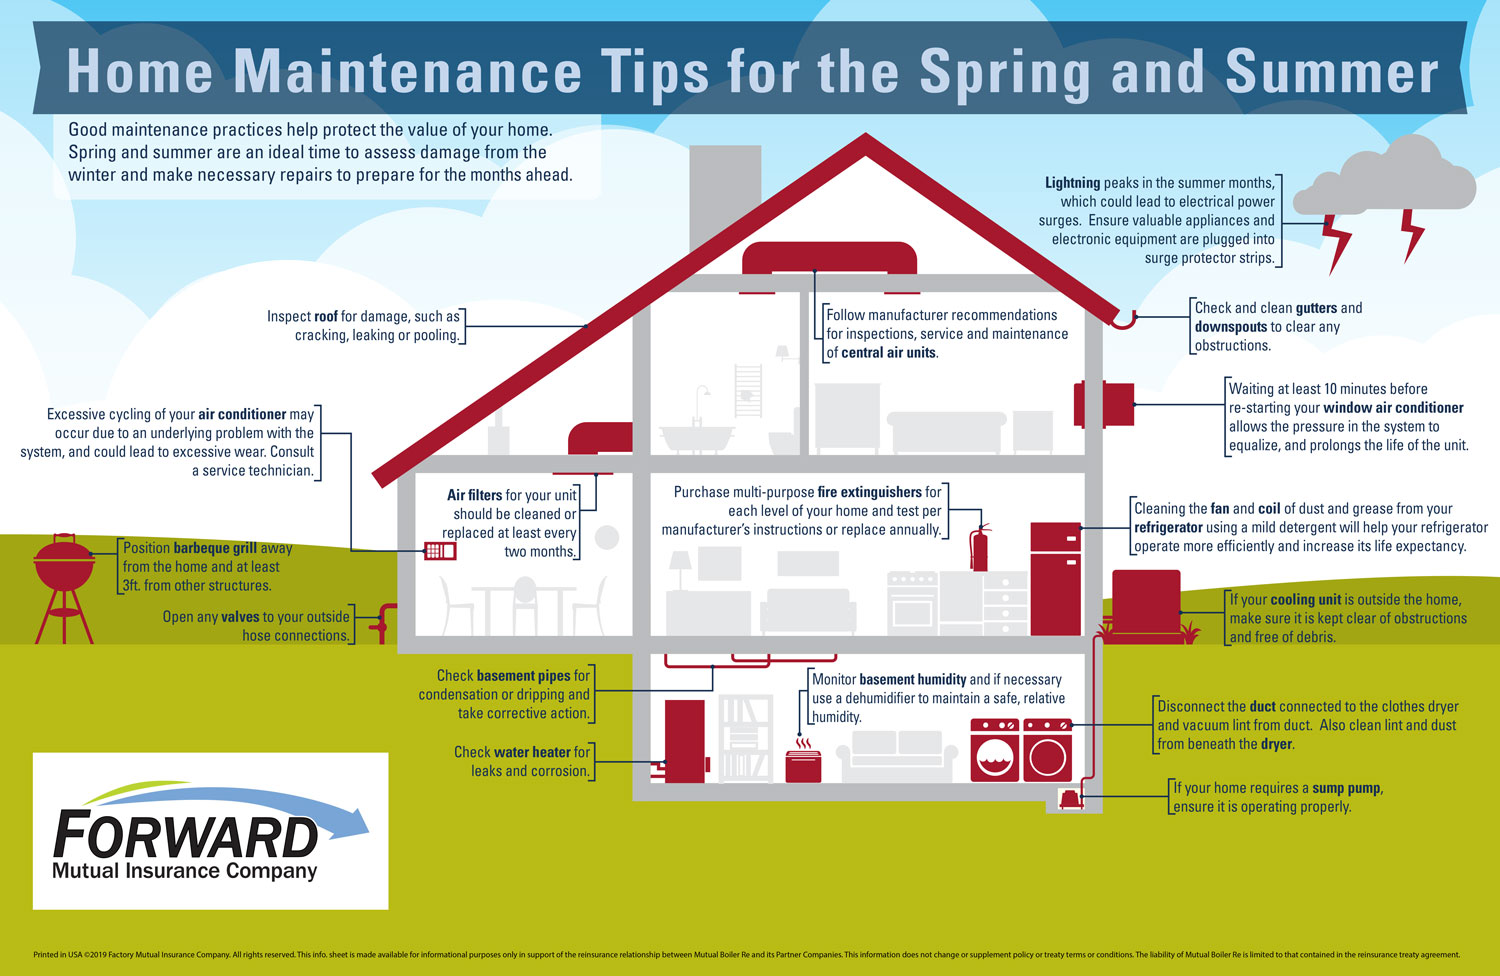 Home Maintenance Tips for Summer, Forward Mutual